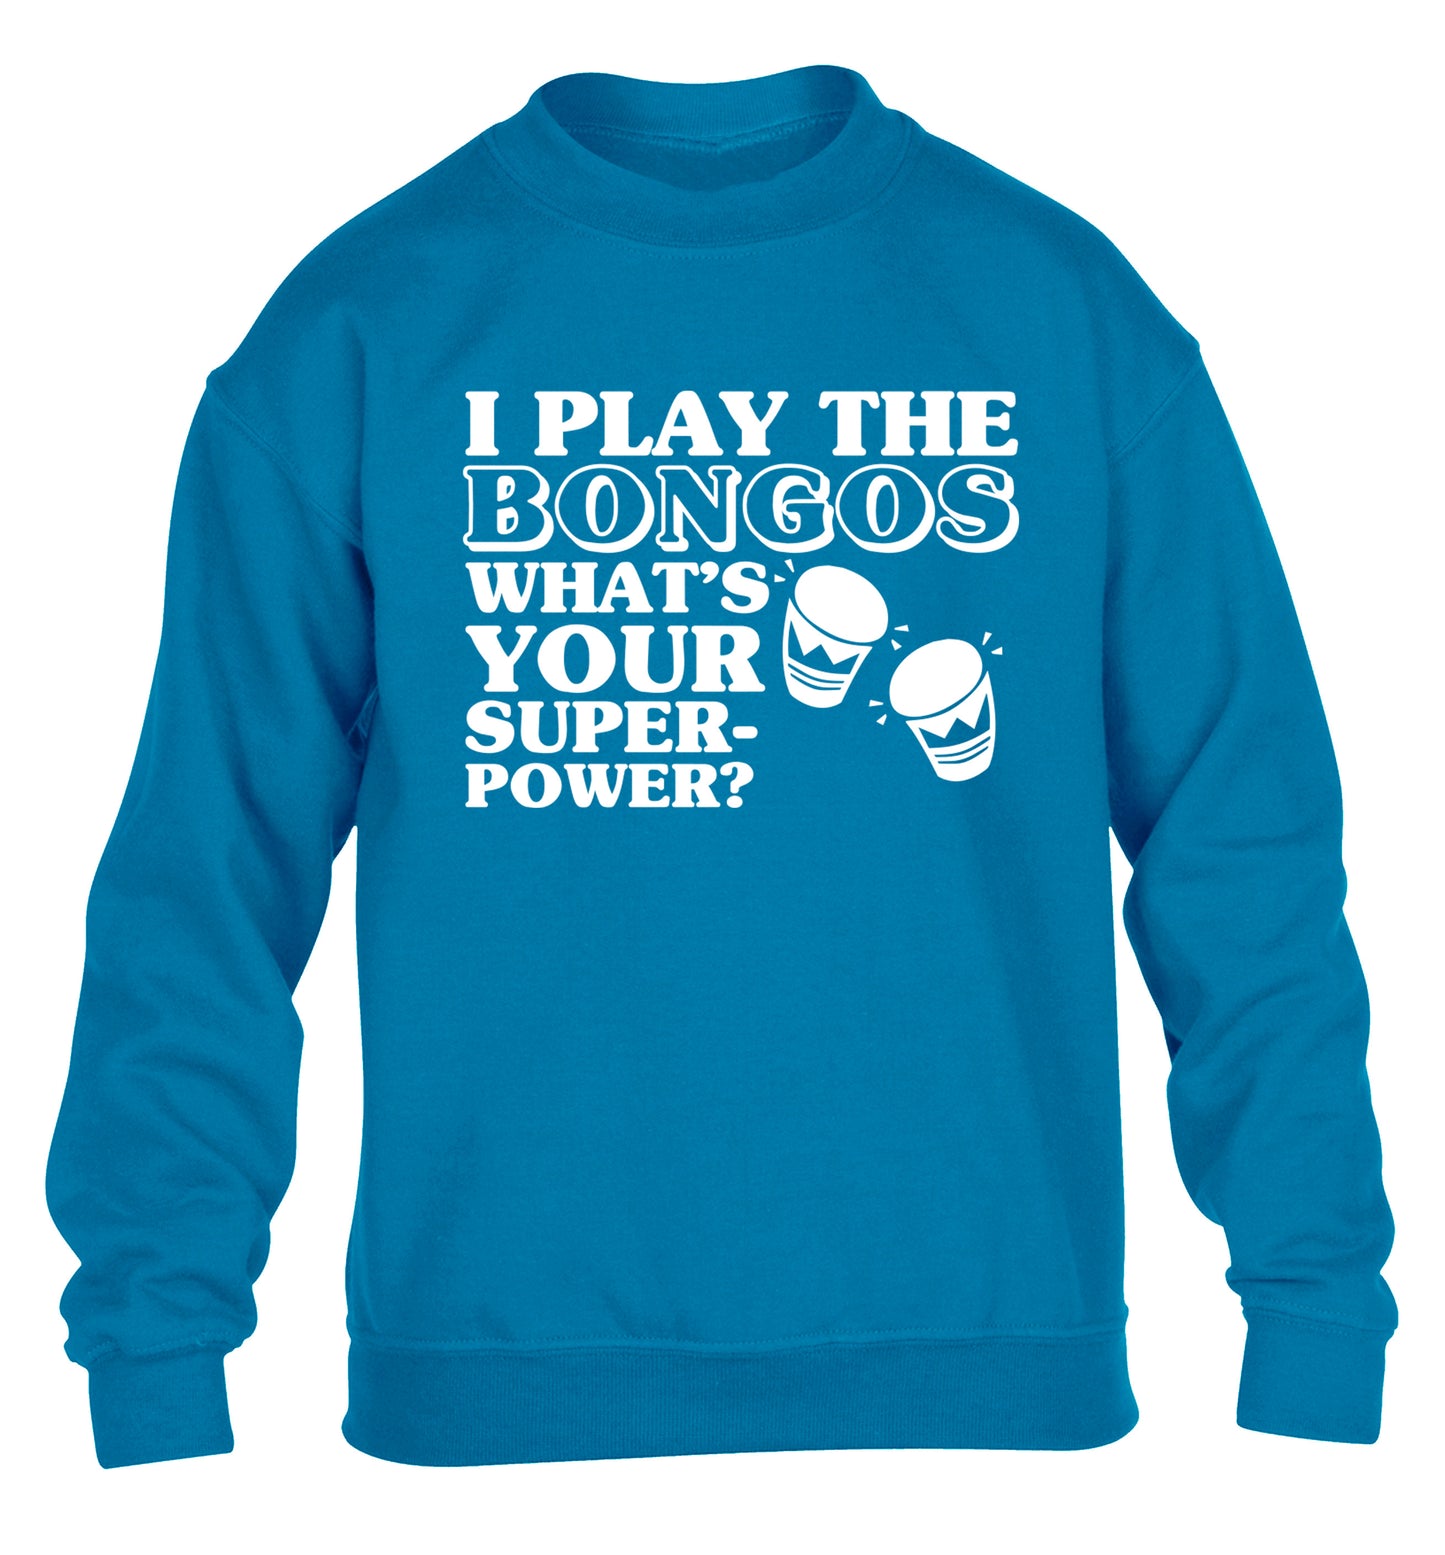 I play the bongos what's your superpower? children's blue sweater 12-14 Years